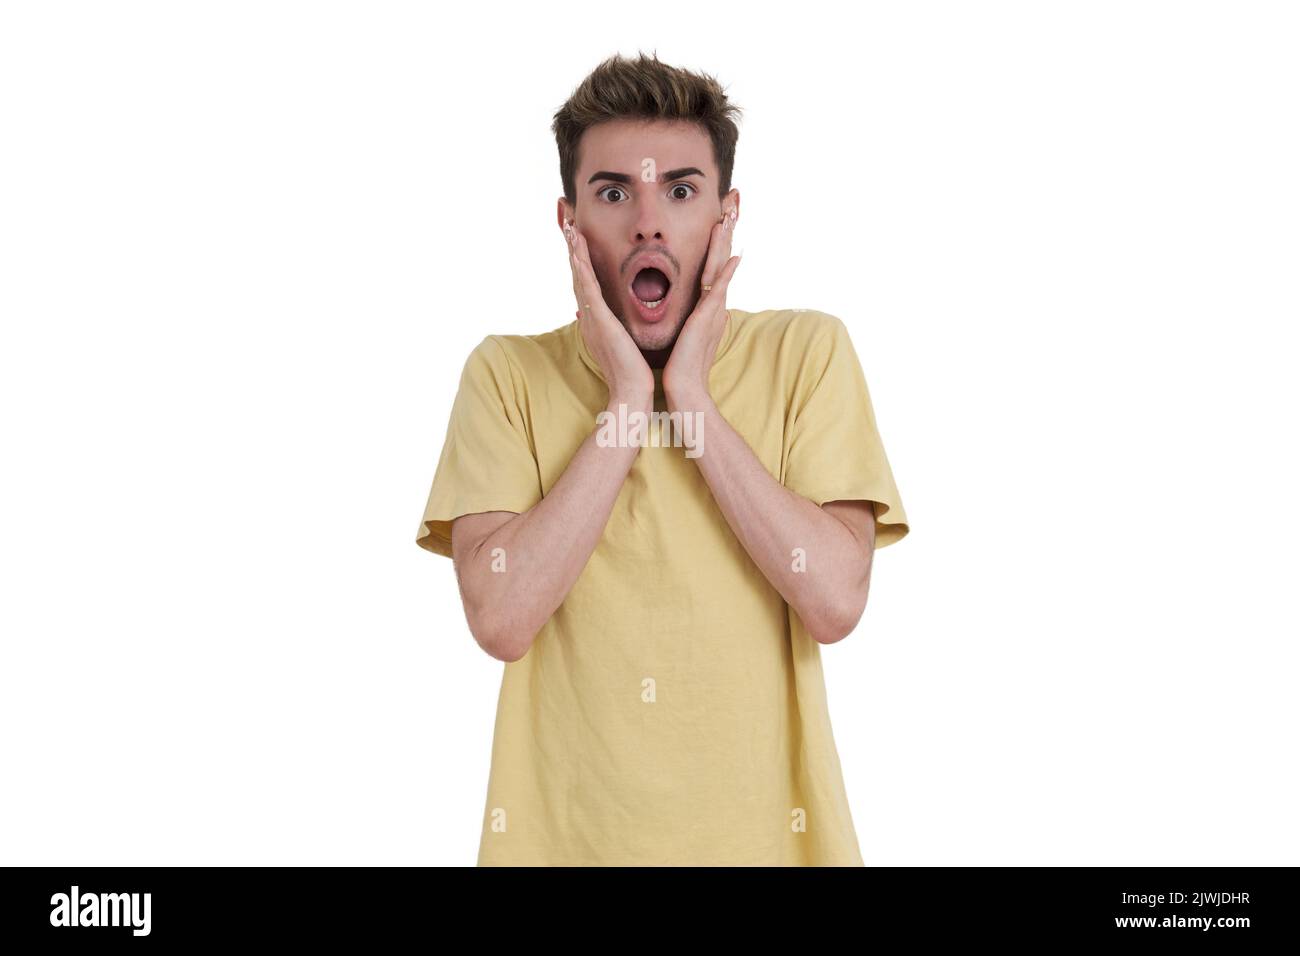 Young caucasian man surprised, isolated. Stock Photo